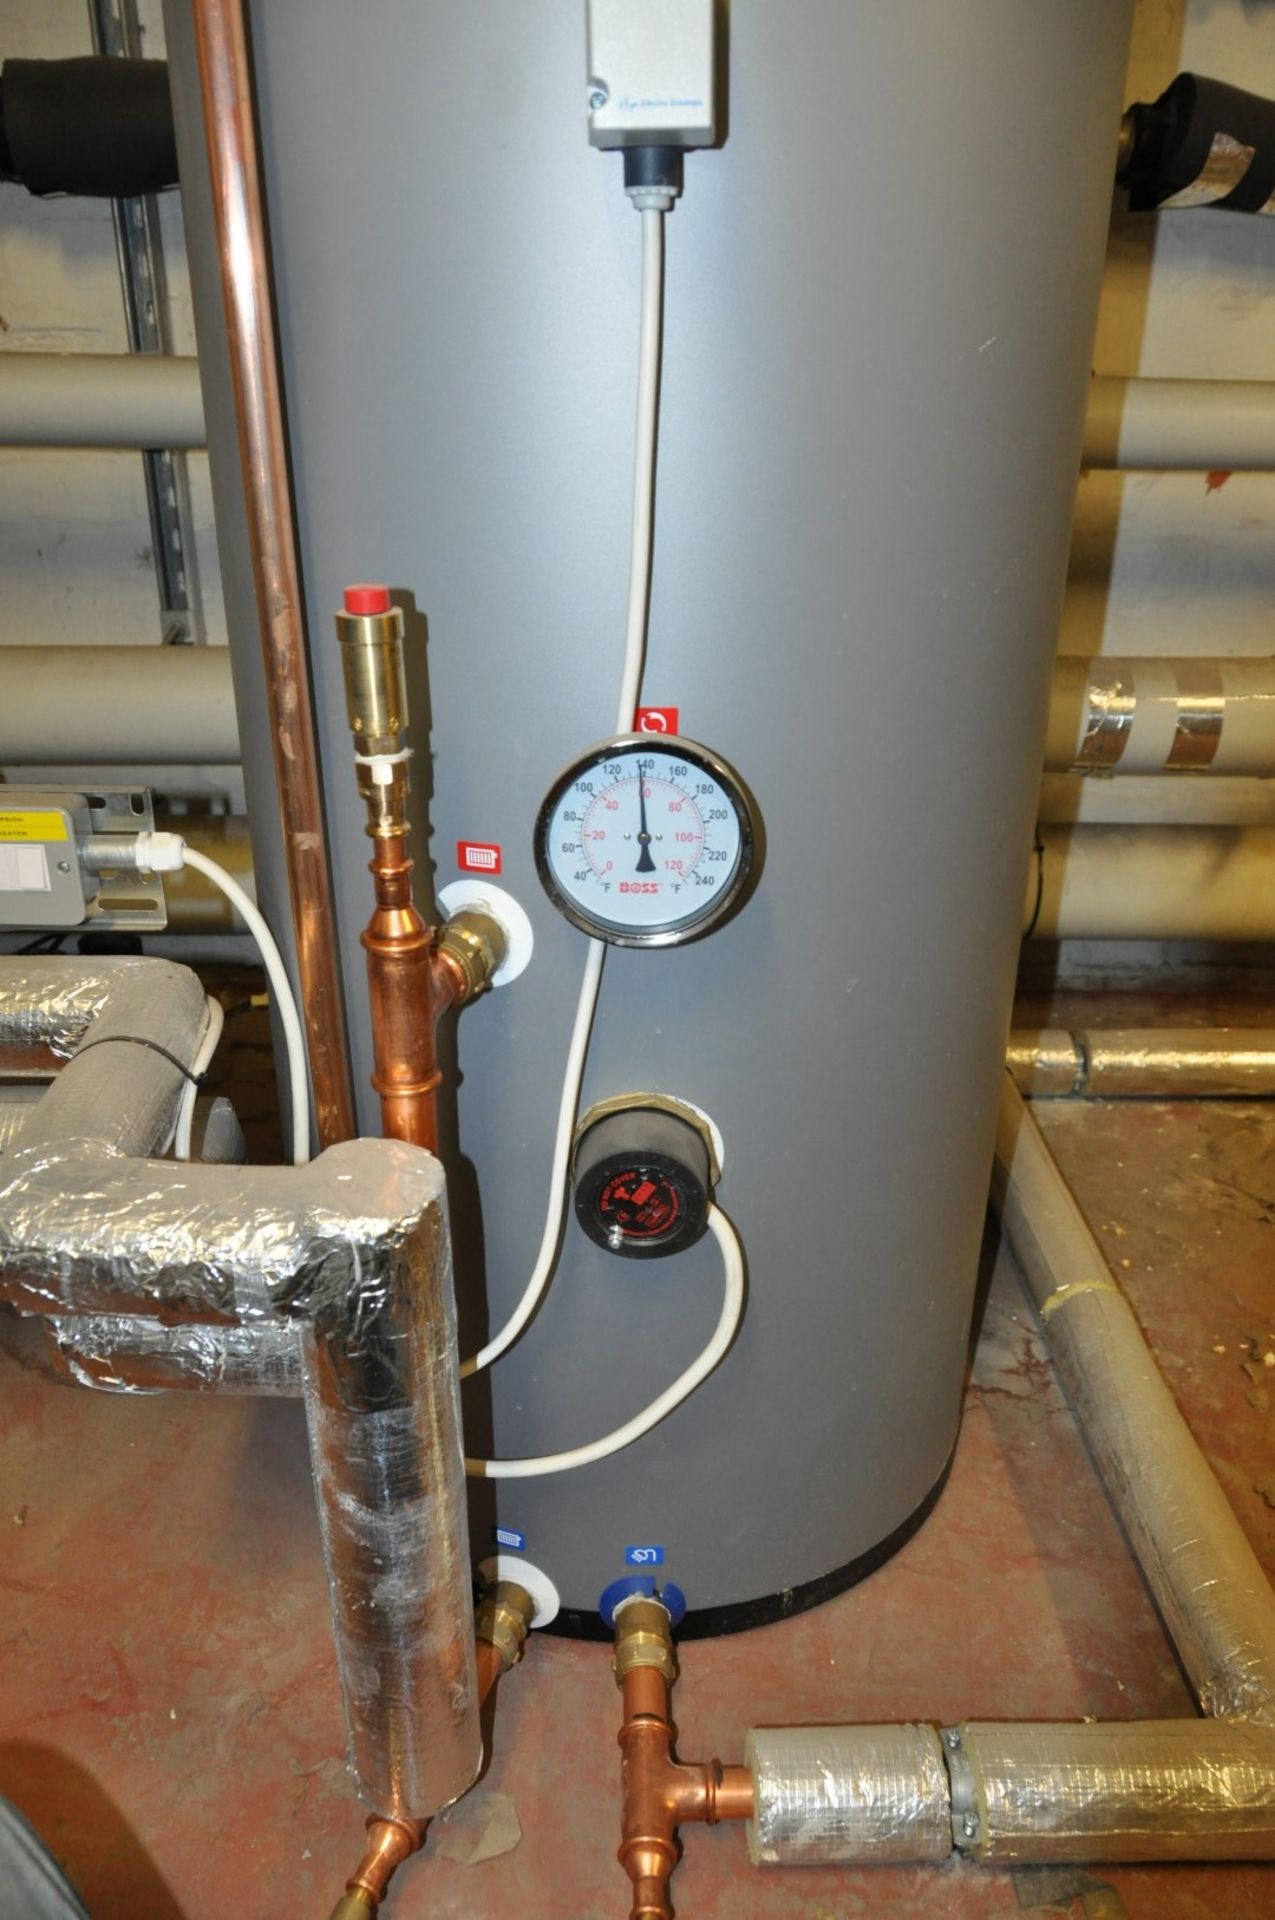 1 x Emmersion Heater Tank With Boss Pressure Gauge and Electronic Controls - Height 155cm - Buyer to - Image 2 of 7